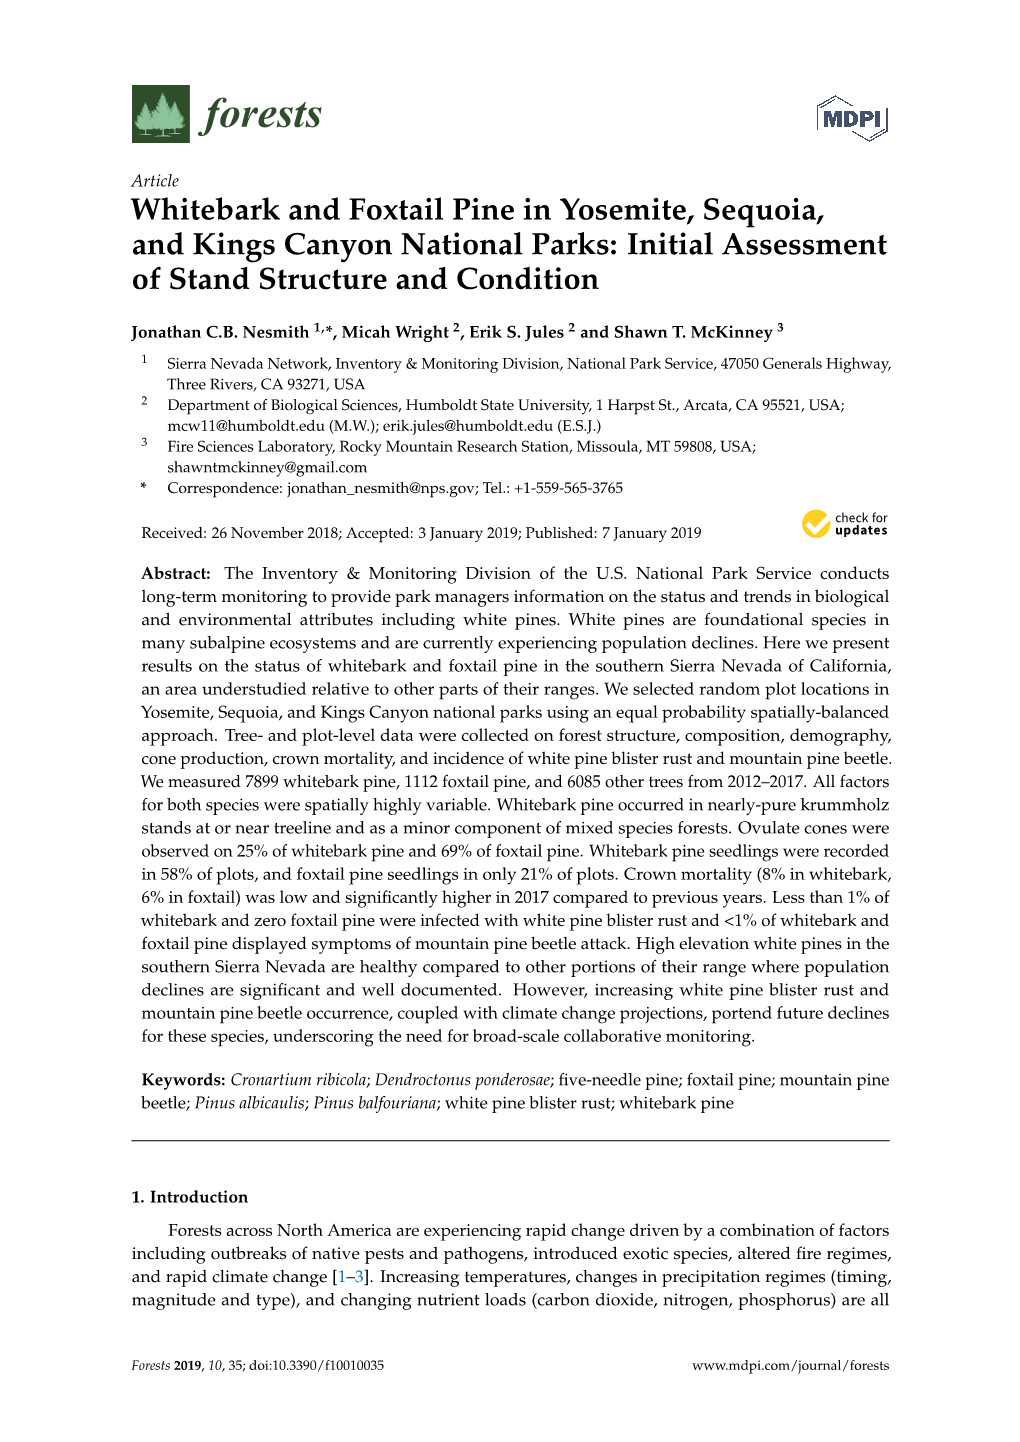 Whitebark and Foxtail Pine in Yosemite, Sequoia, and Kings Canyon National Parks: Initial Assessment of Stand Structure and Condition